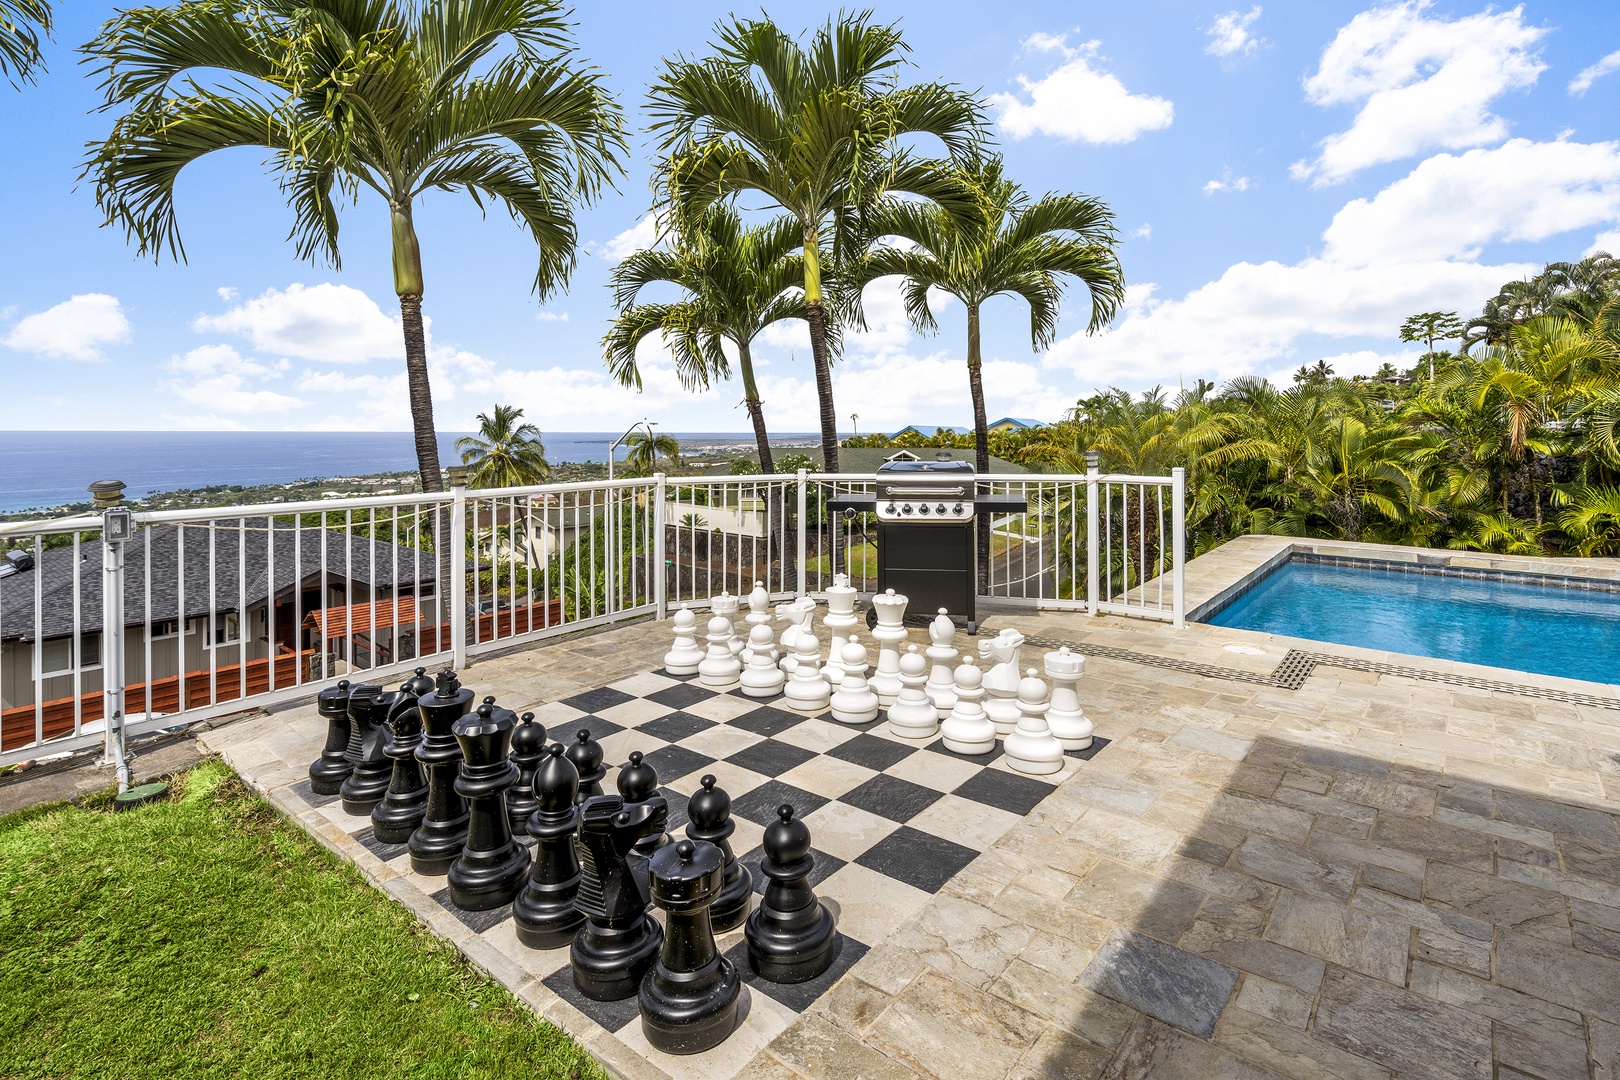 Kailua-Kona Vacation Rentals, Honu Hale - Outdoor chess for all ages to partake in!